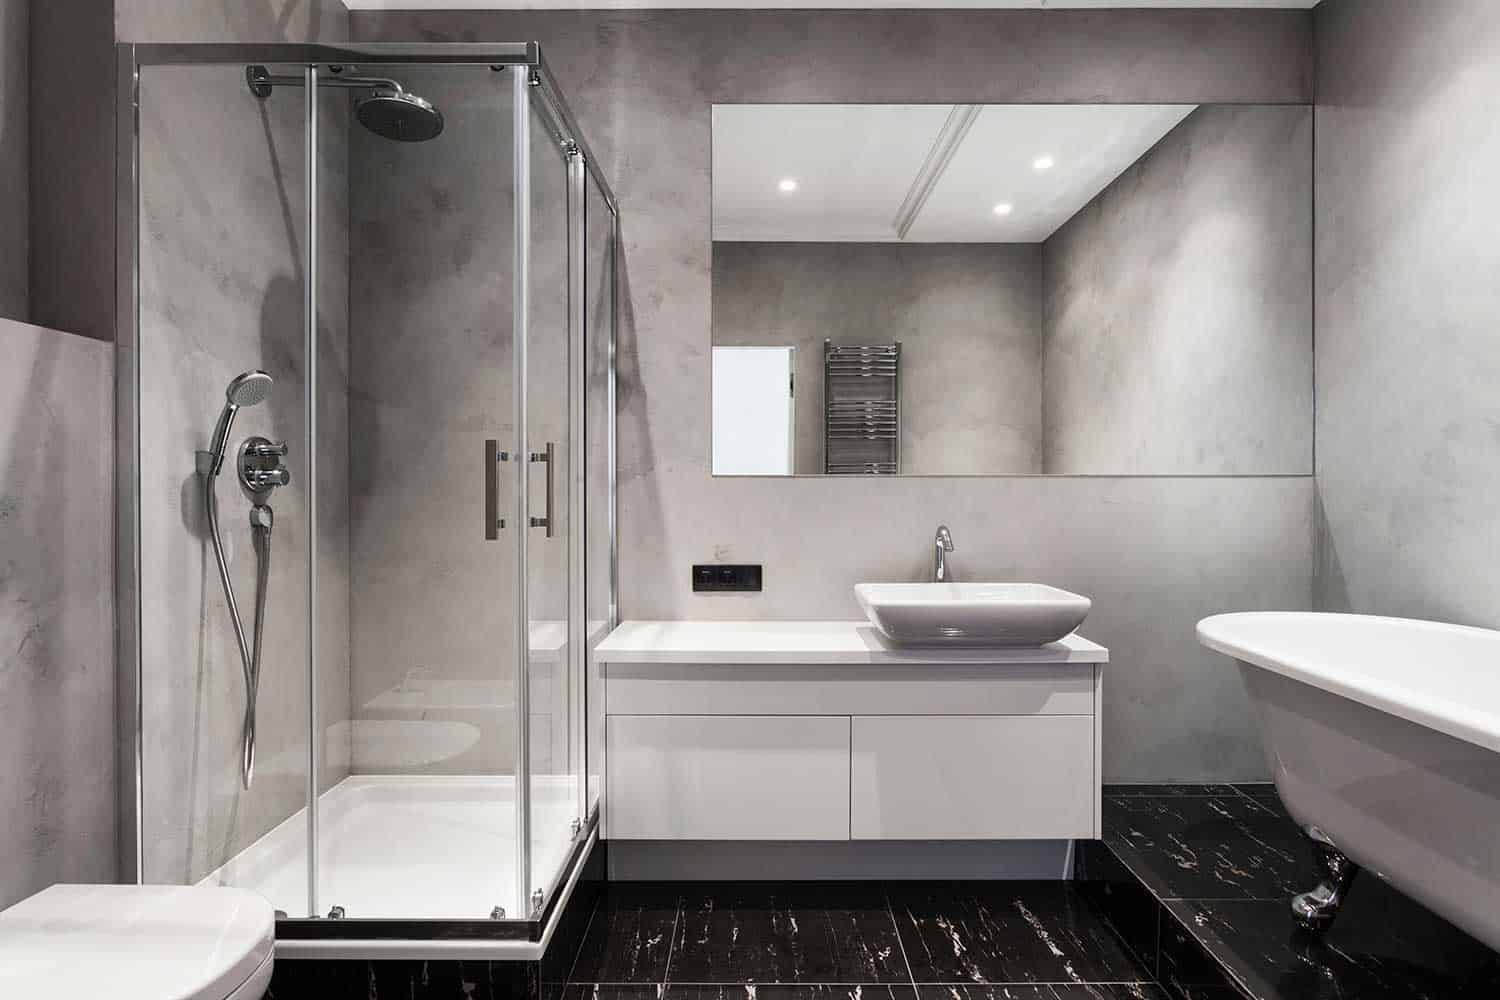 Bathroom with basin, shower cabin, large mirror and chrome silver heater at gray wall